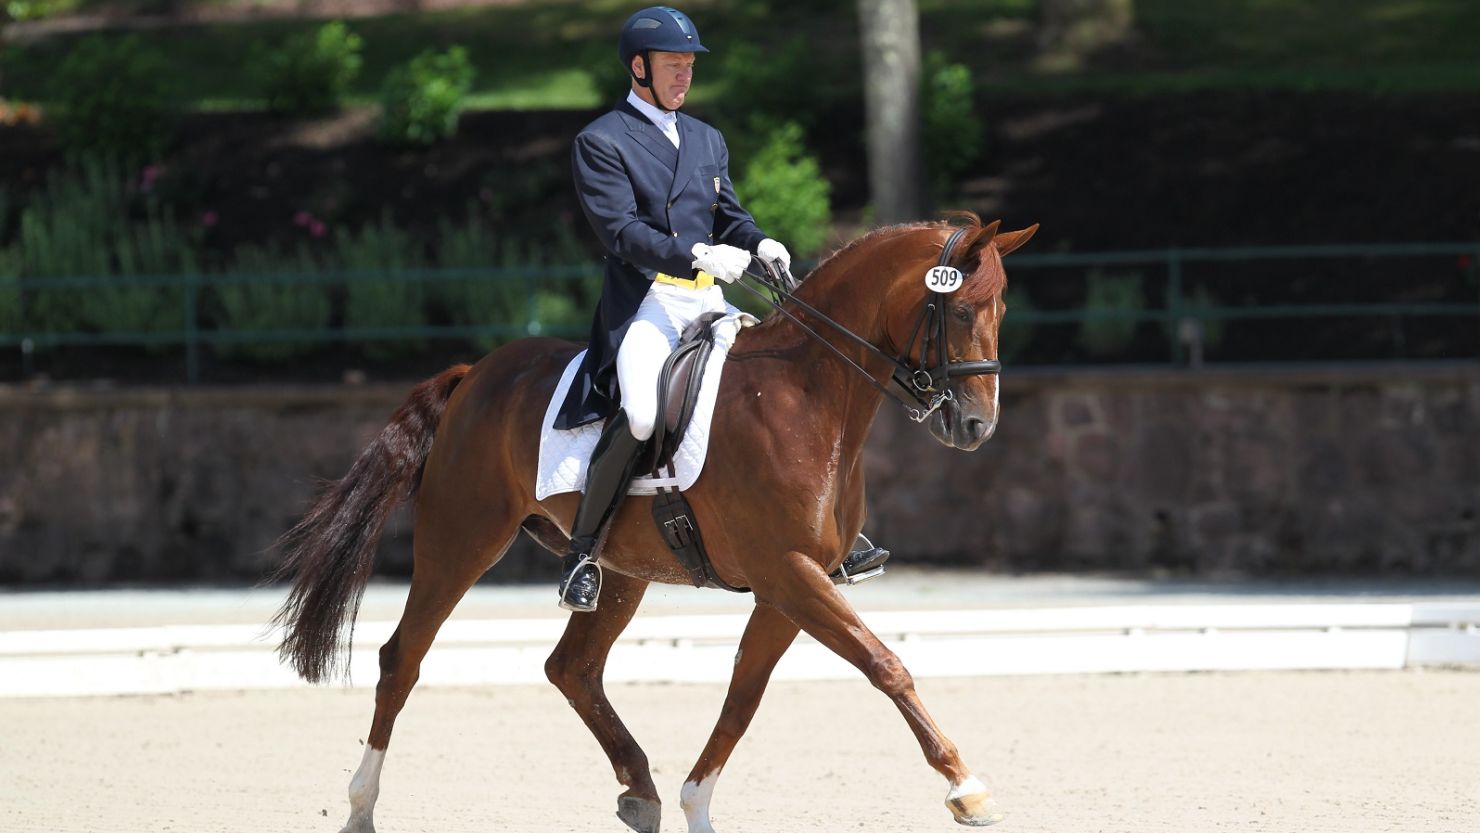 Michael Barisone, former dressage Olympian, has been charged with attempted murder.